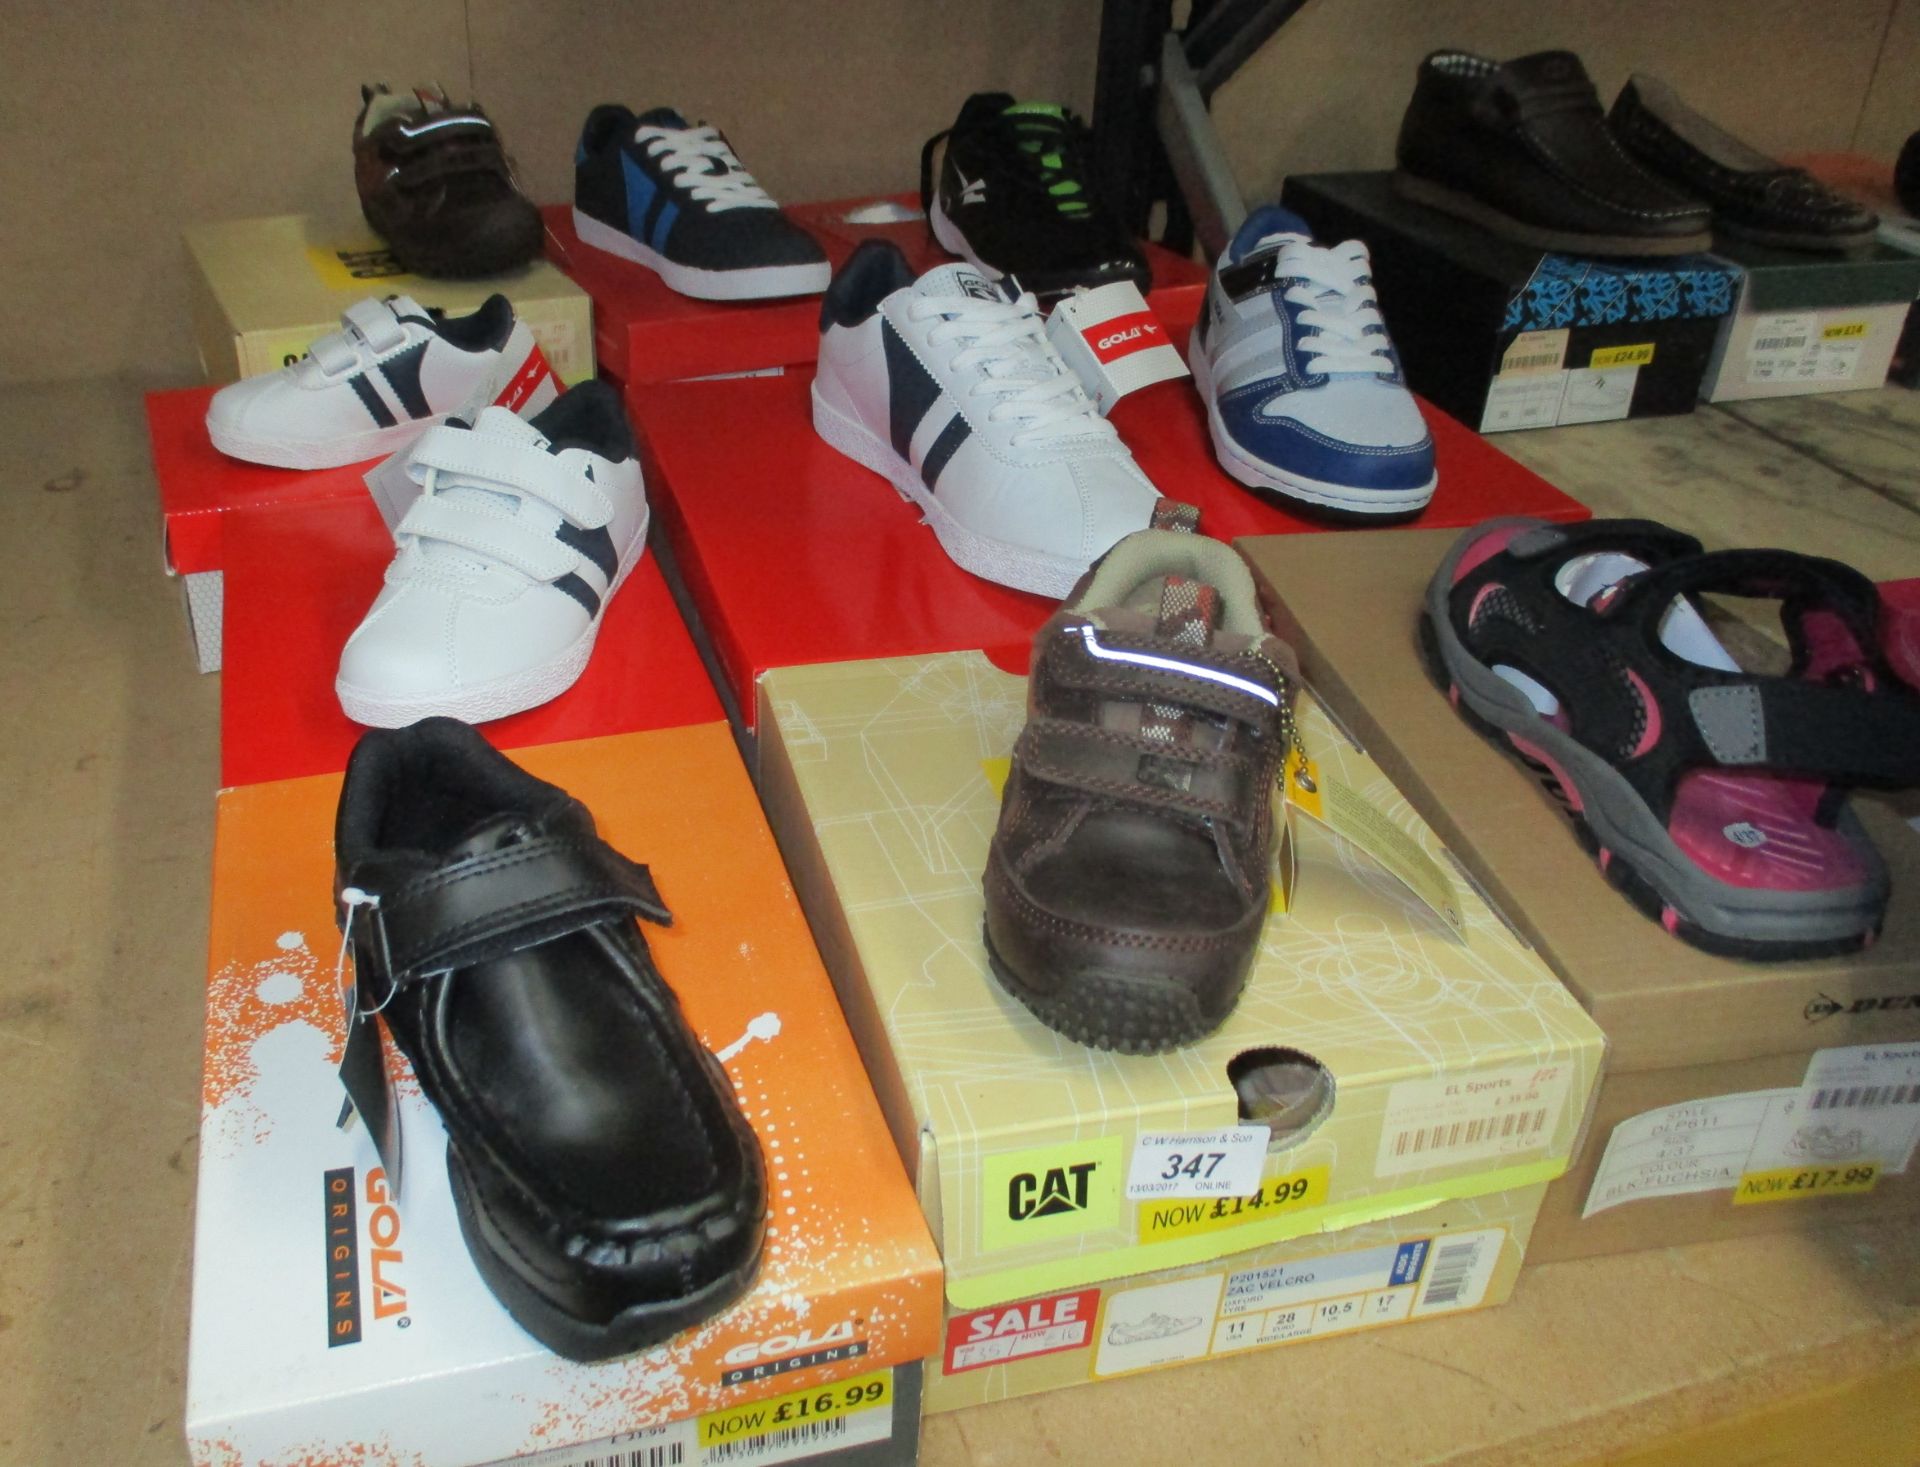 10 x assorted pairs of children's shoes by Gola, CAT,